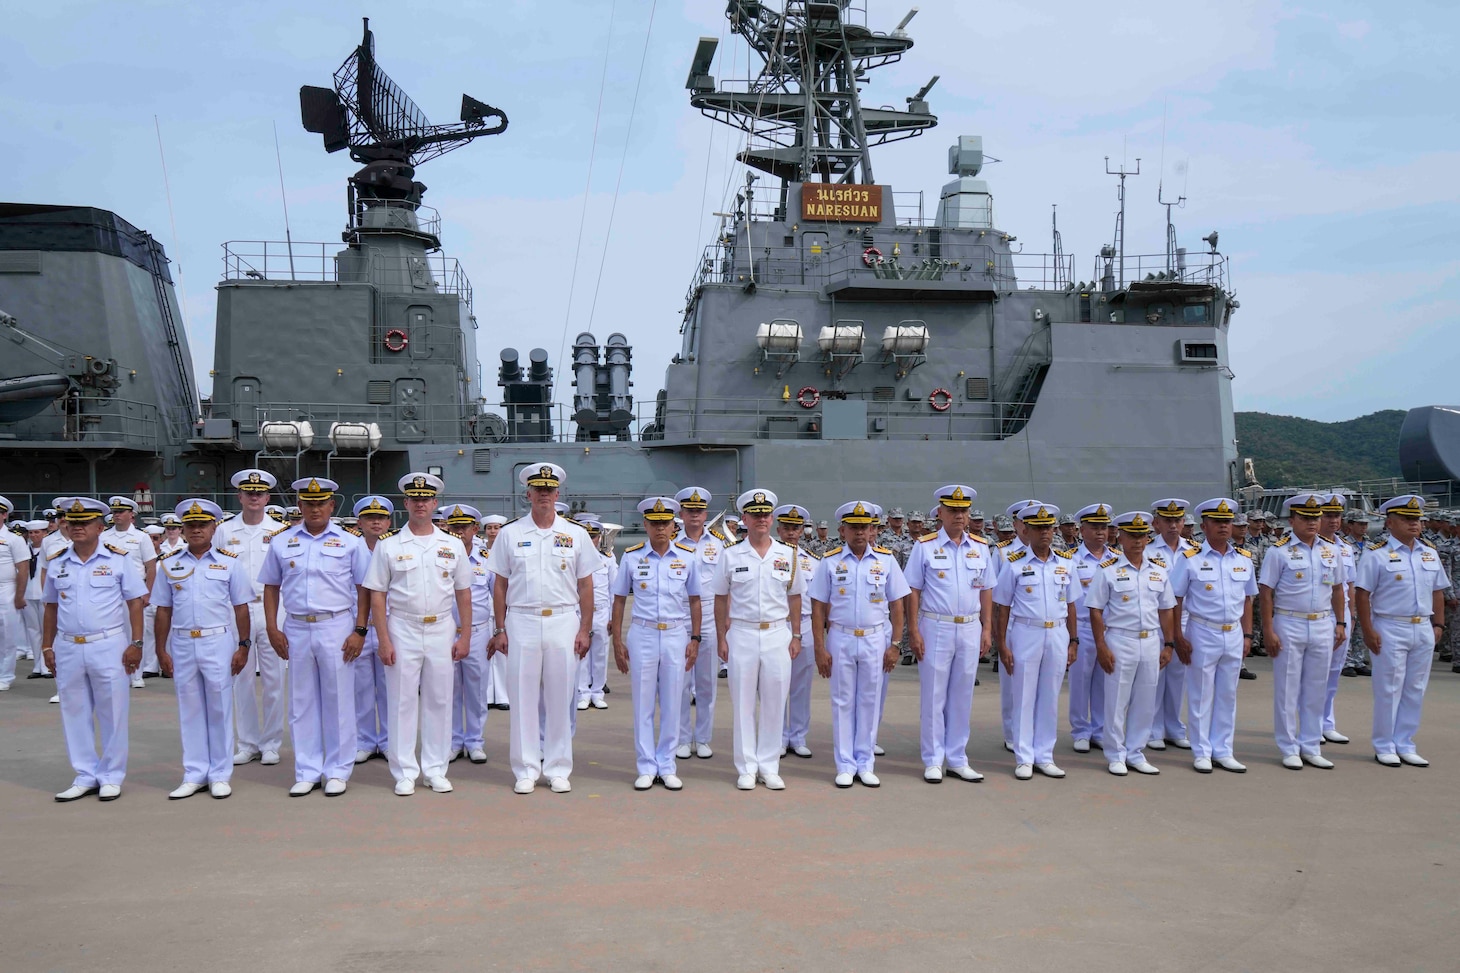 U.S. and Royal Thai Navy personnel take a photo with Rear Adm. Derek A. Trinque, commander Expeditionary Strike Group SEVEN/ Task Force 76 (ESG 7/ CTF 76) during the opening ceremony of Cooperation Afloat Readiness and Training (CARAT)/Marine Exercise (MAREX), 2023 at Royal Thai Fleet Headquarters, May 8. CARAT/MAREX Thailand is a bilateral exercise between the Kingdom of Thailand and United States to promote regional security cooperation, practice humanitarian assistance and disaster relief, and strengthen maritime understanding, partnerships and interoperability. Thailand has been part of the CARAT exercise series since 1995. In its 29th year, the CARAT series is comprised of multinational exercises, designed to enhance U.S. and partner forces’ abilities to operate together in response to traditional and non-traditional maritime security challenges in the Indo-Pacific region.